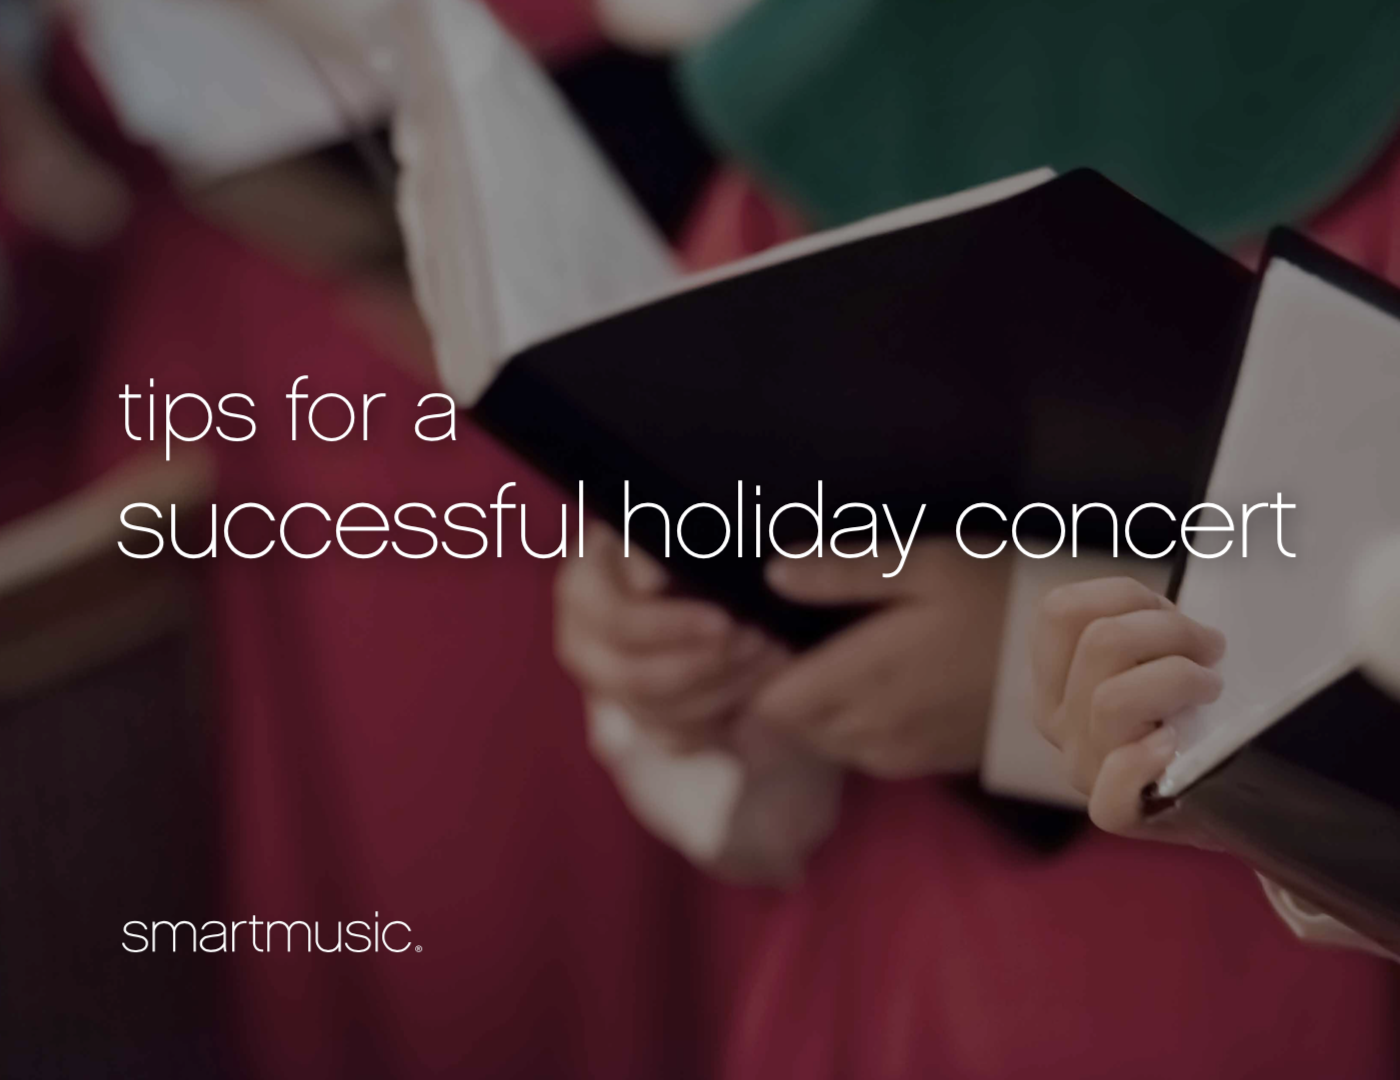 tips for a successful holiday concert